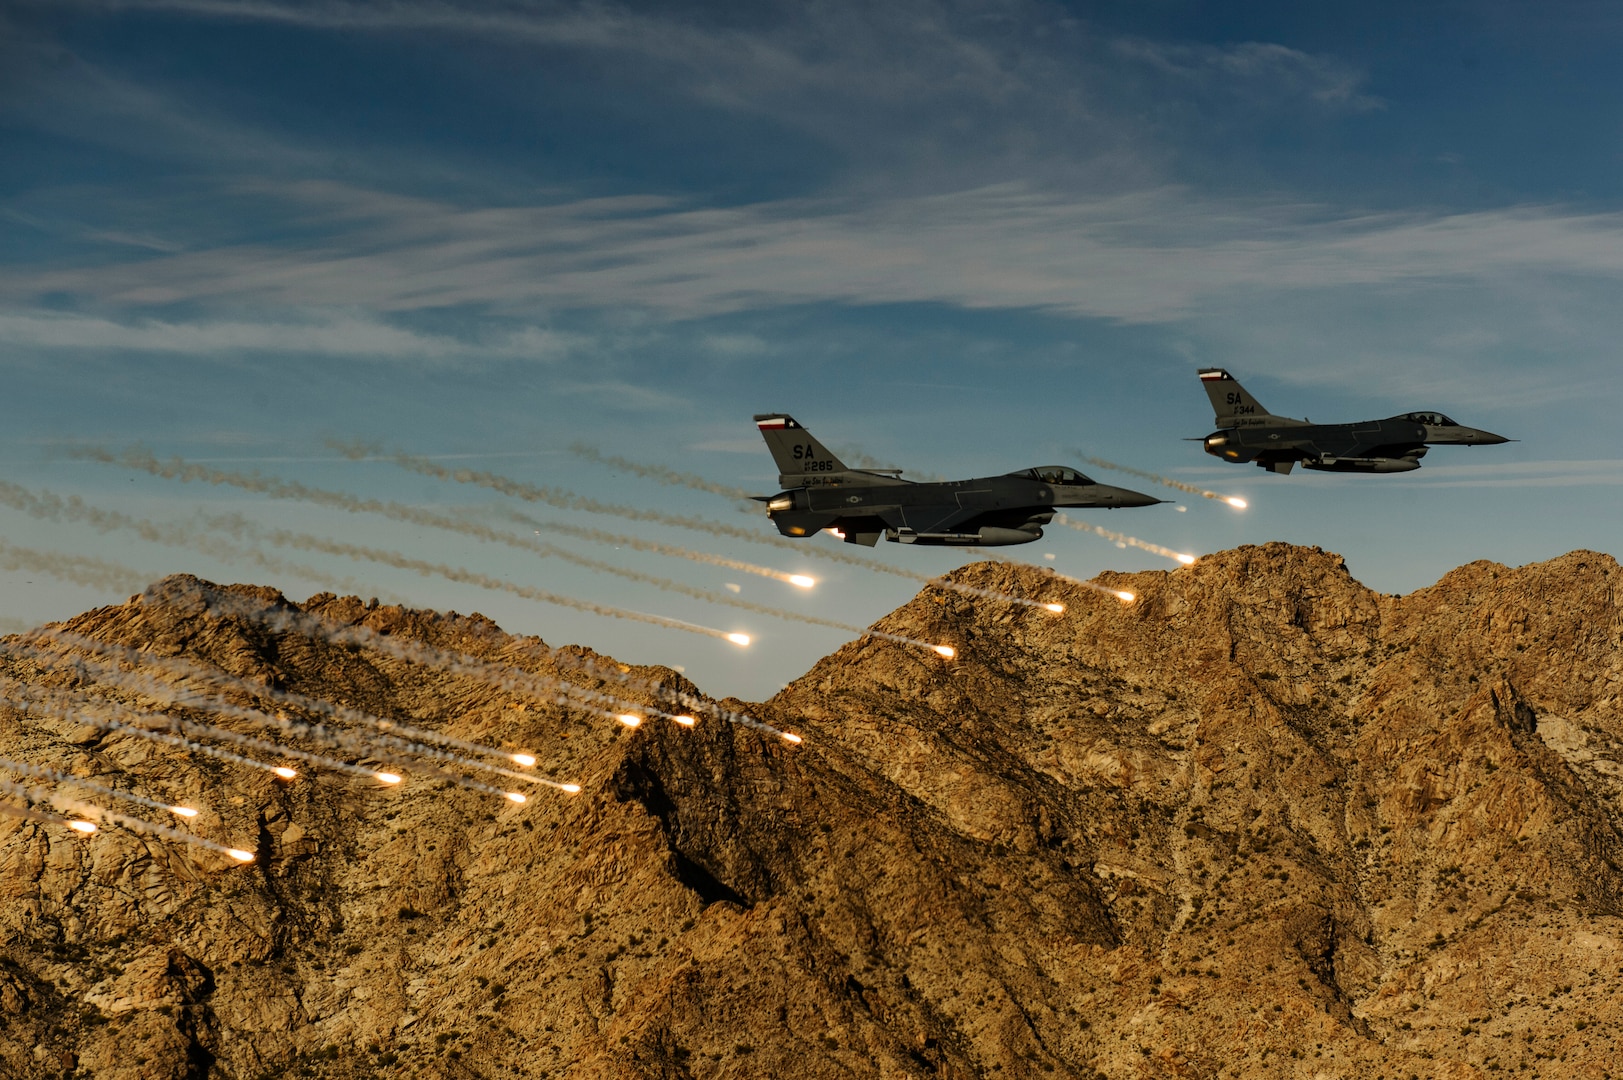 Two F-16C Fighting Falcon, 182nd Fighter Squadron, releases flares while conducting low-level combat training during Coronet Cactus exercise near Davis-Monthan Air Force Base, Ariz., April 10, 2014. This exercise provides realistic combat training for student fighter pilots from air-to-air combat to dropping inert and live ordnance. (U.S. Air Force photo/ Staff Sgt. Jonathan Snyder)